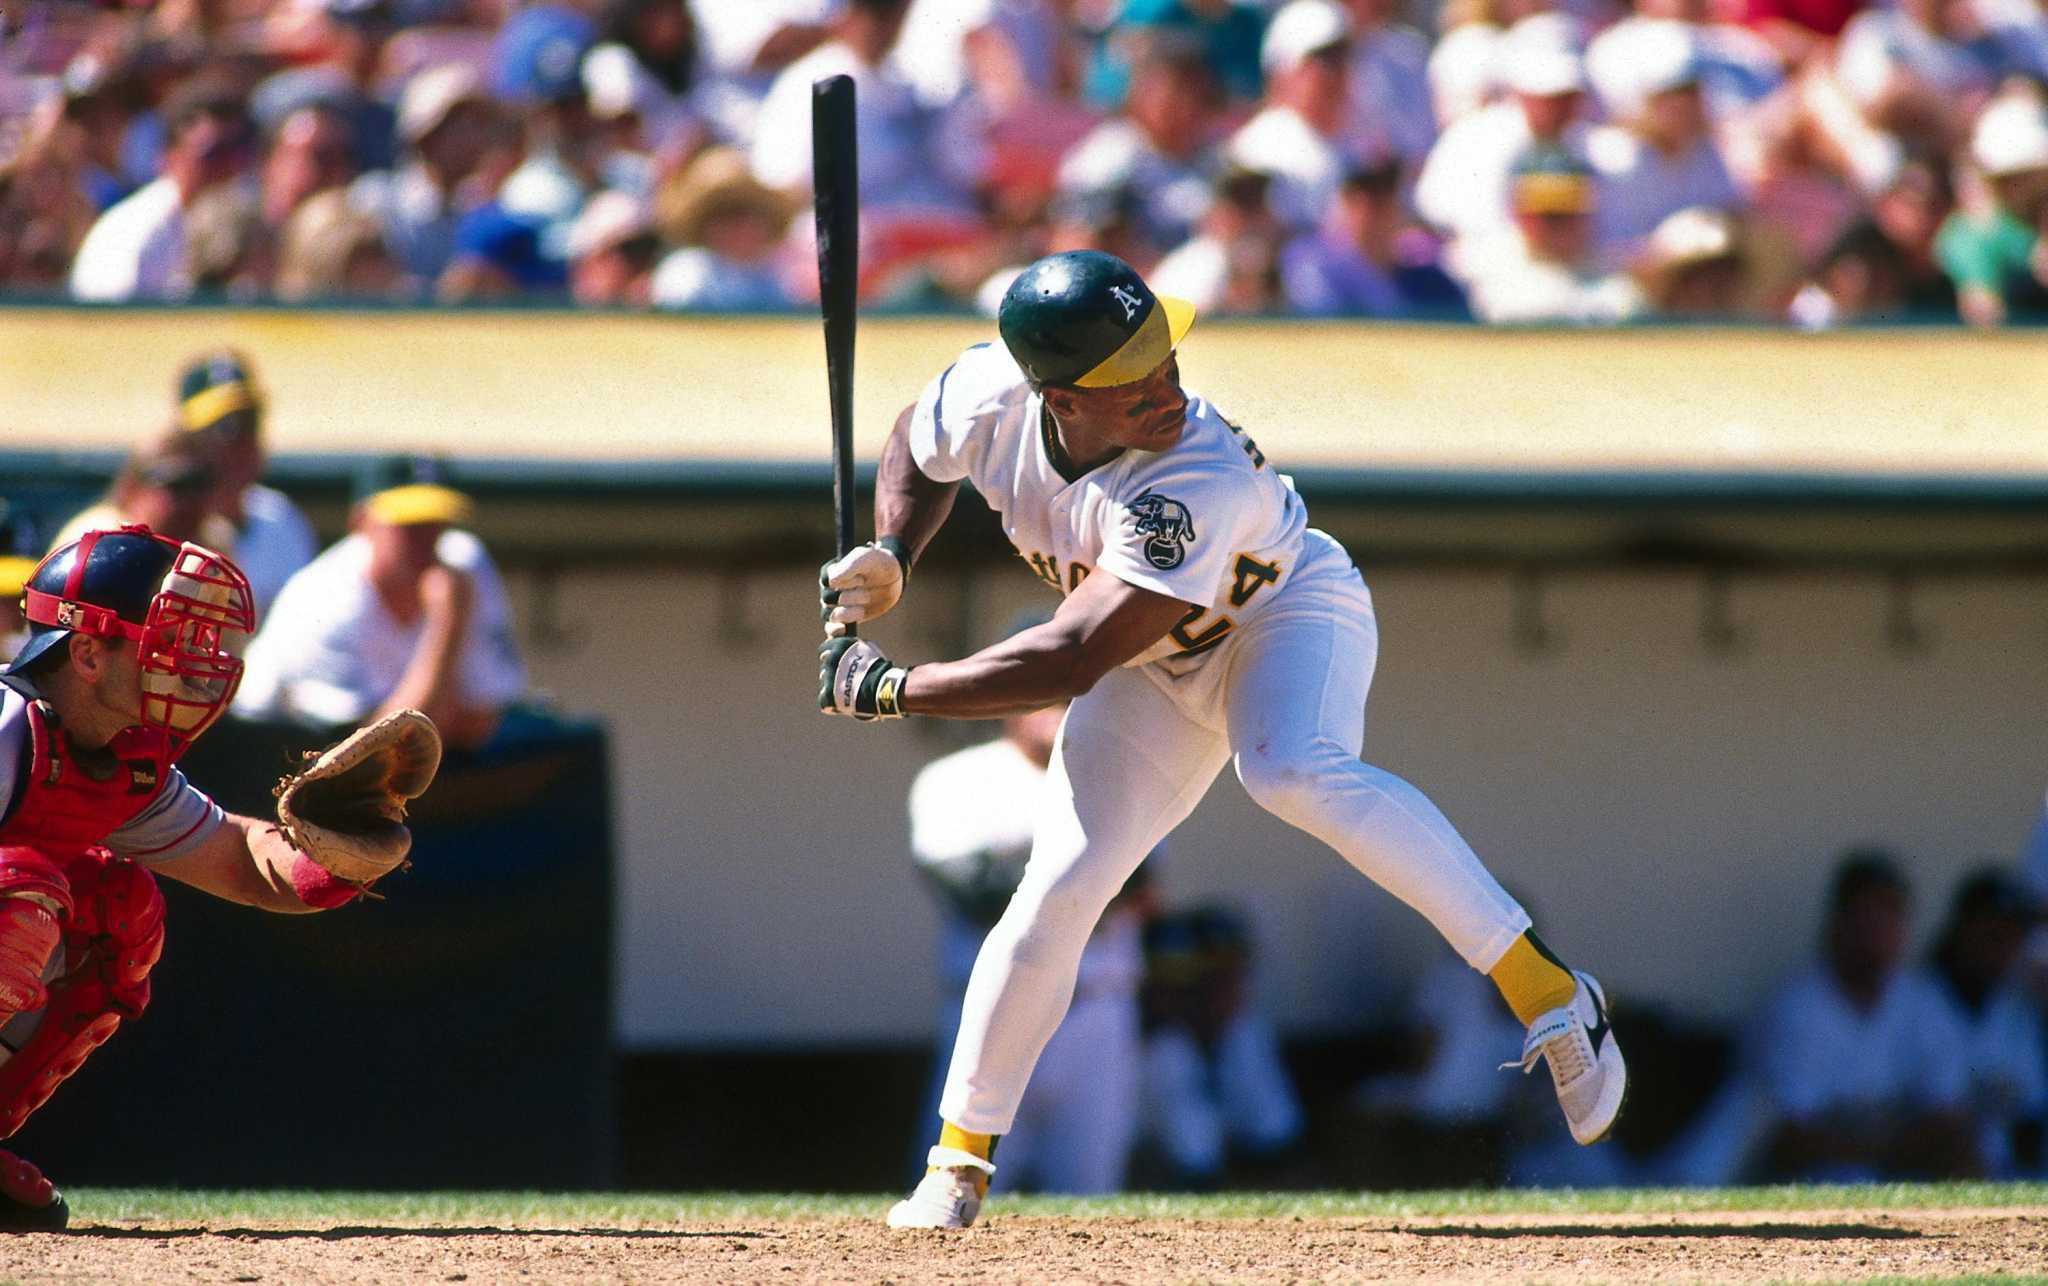 Rickey' excerpt: Looking back at Rickey Henderson's Oakland roots